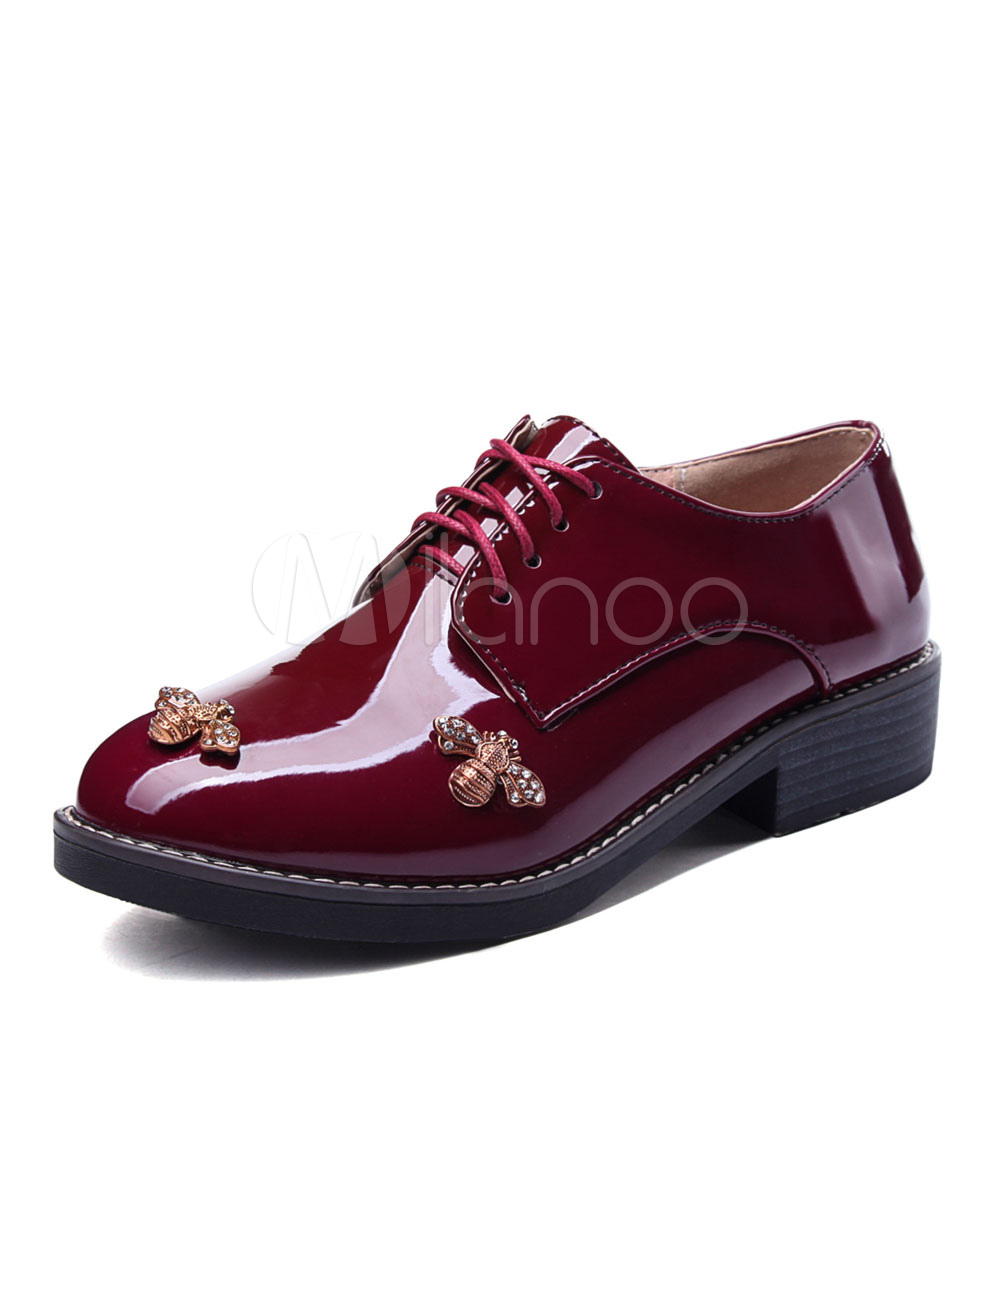 Burgundy Oxford Shoes Women Round Toe 